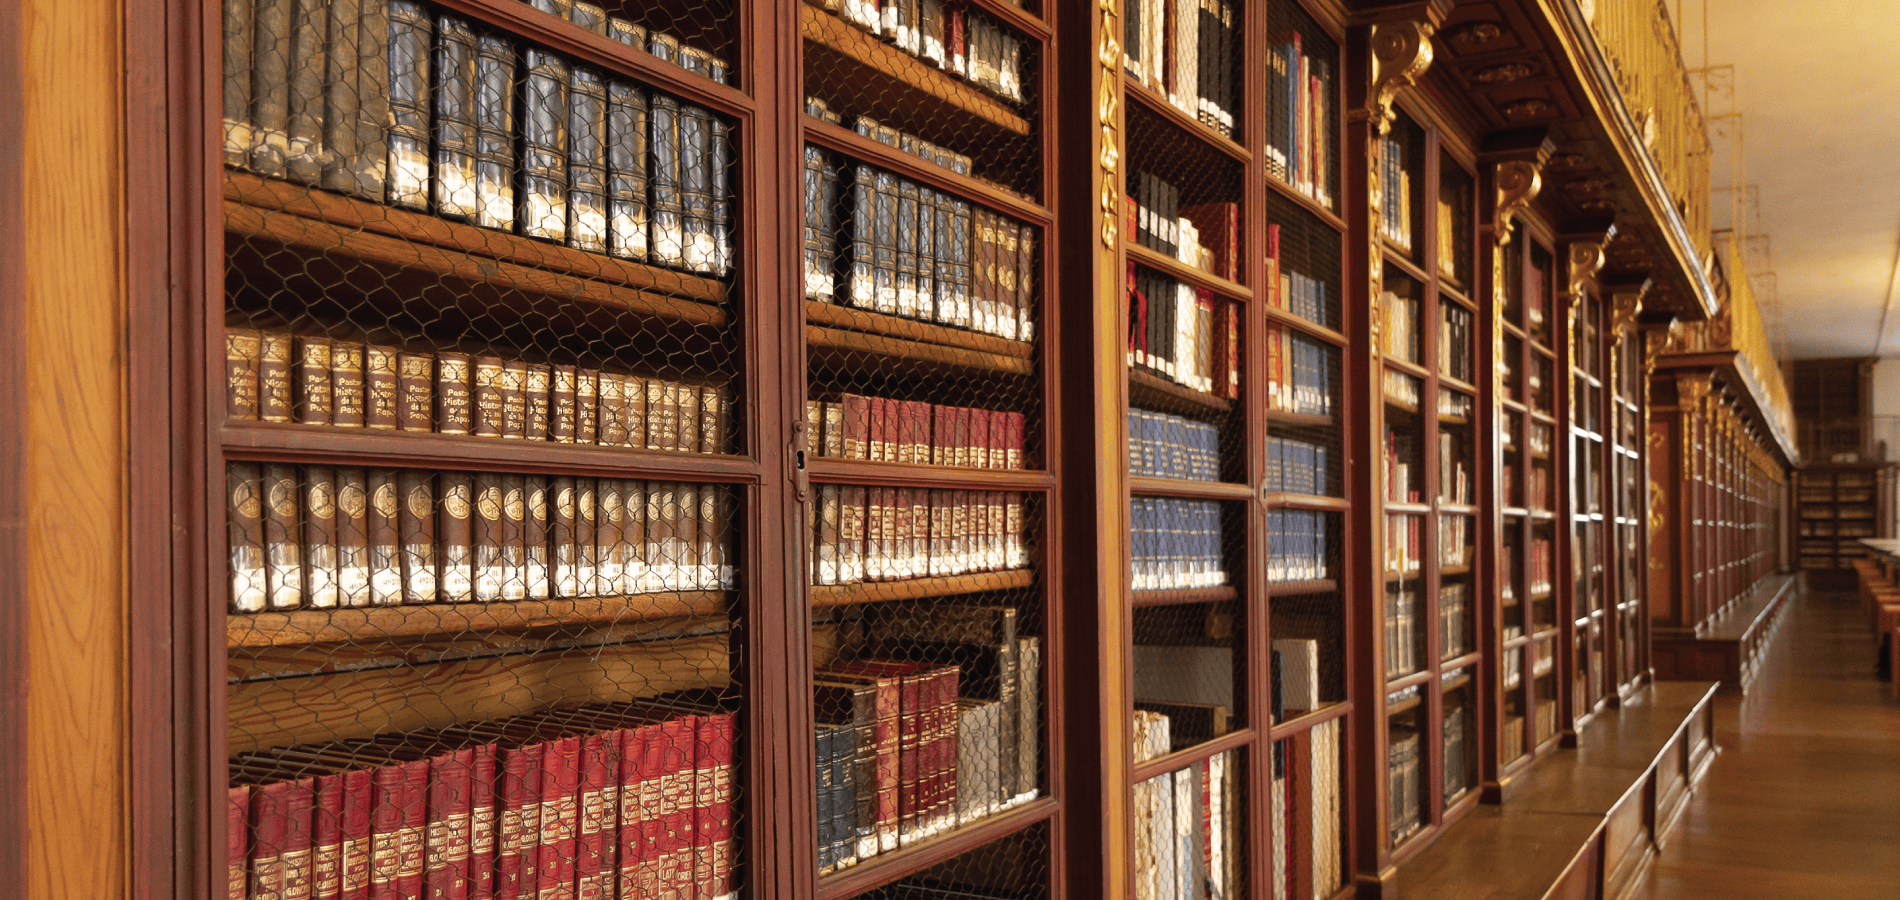 photo of bookshelves in a library